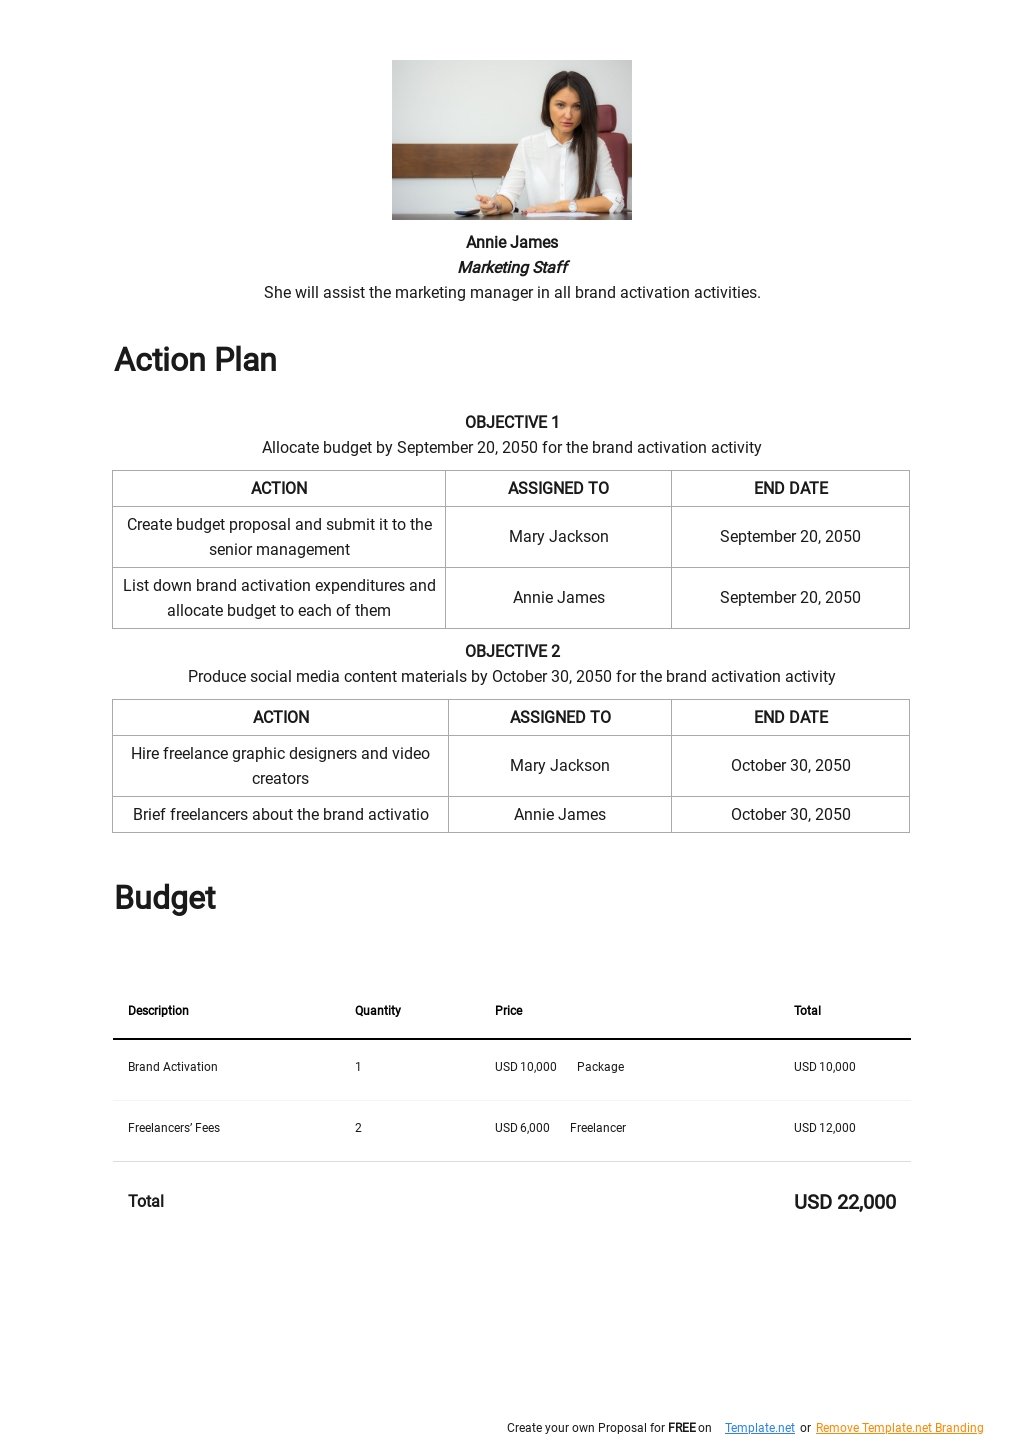 Brand Activation Plan Format Template in Google Docs, Word